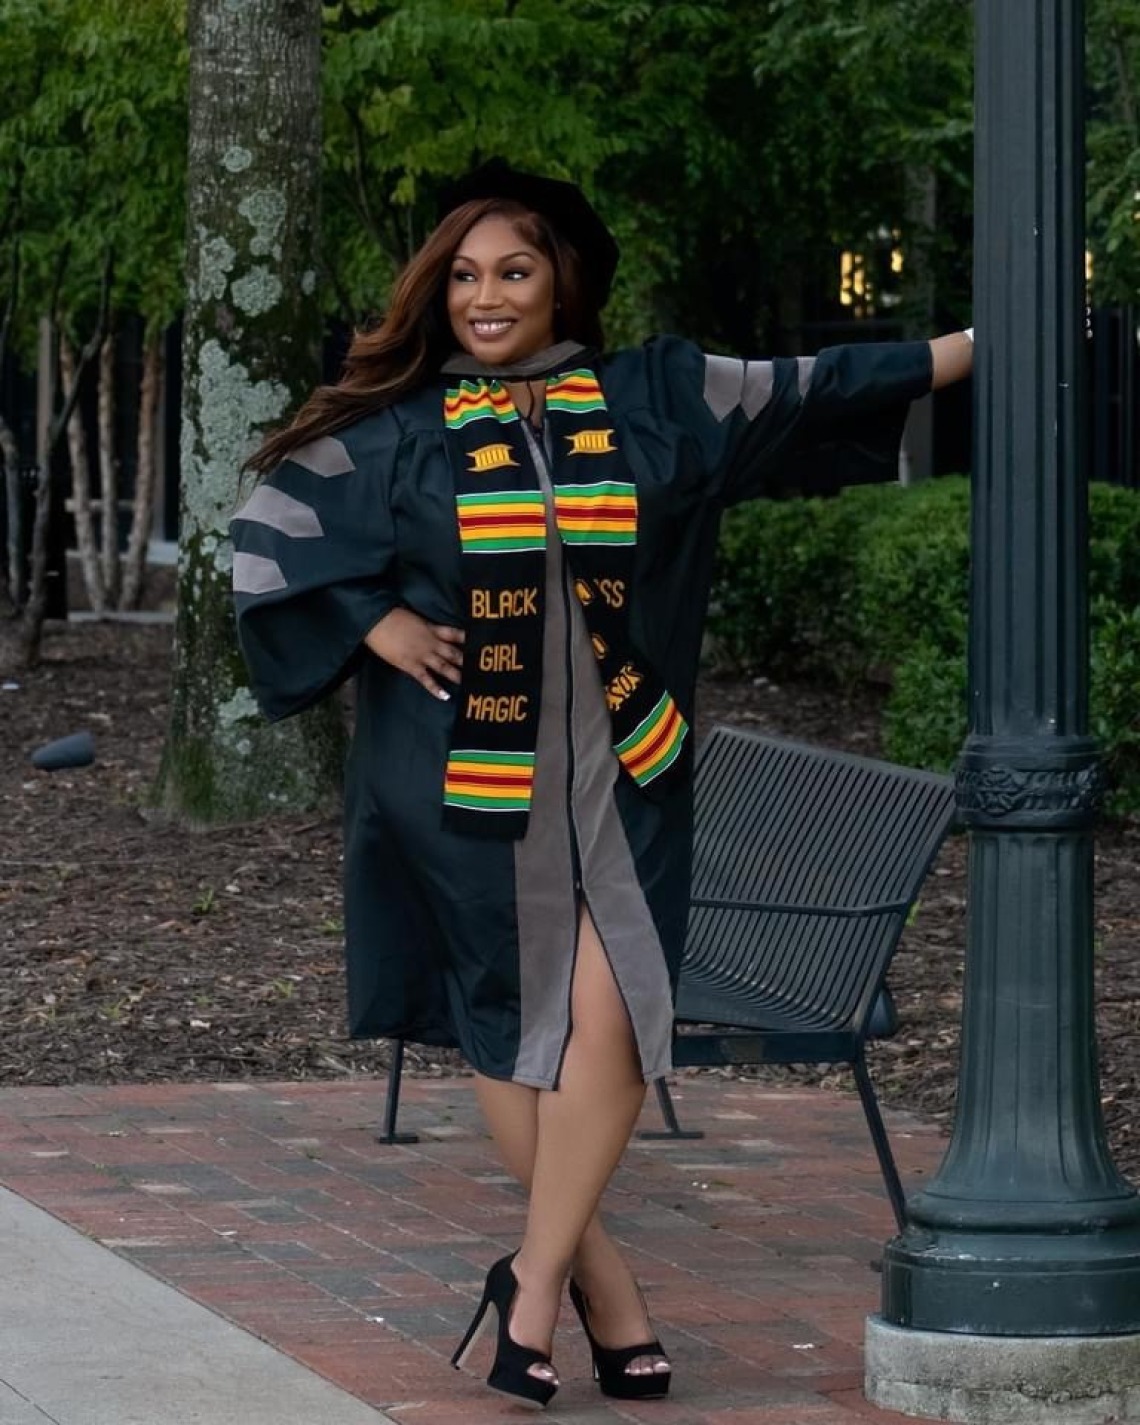 Brittany Johnson wears graduation regalia and poses in a park.